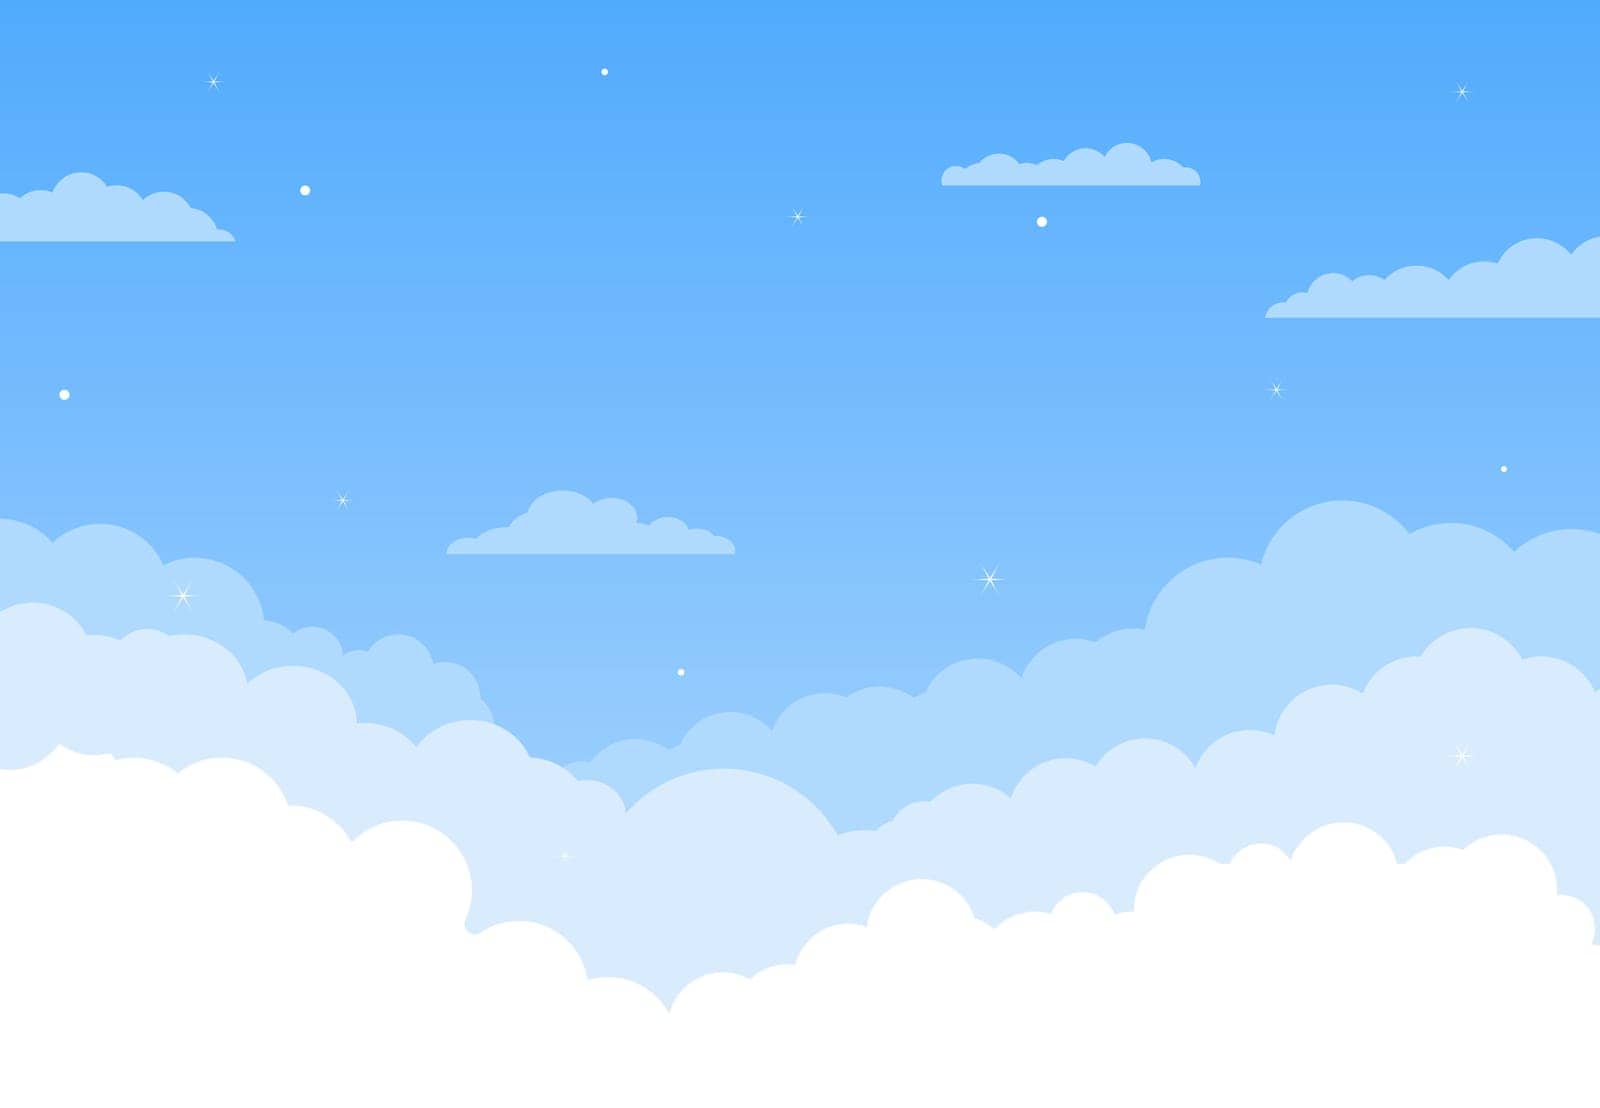 Cartoon style simple skyscape with clouds. Serene blue clear sky background with fluffy white clouds and light sparkles. Anime background. Flat lay for your designs, decoration, poster.